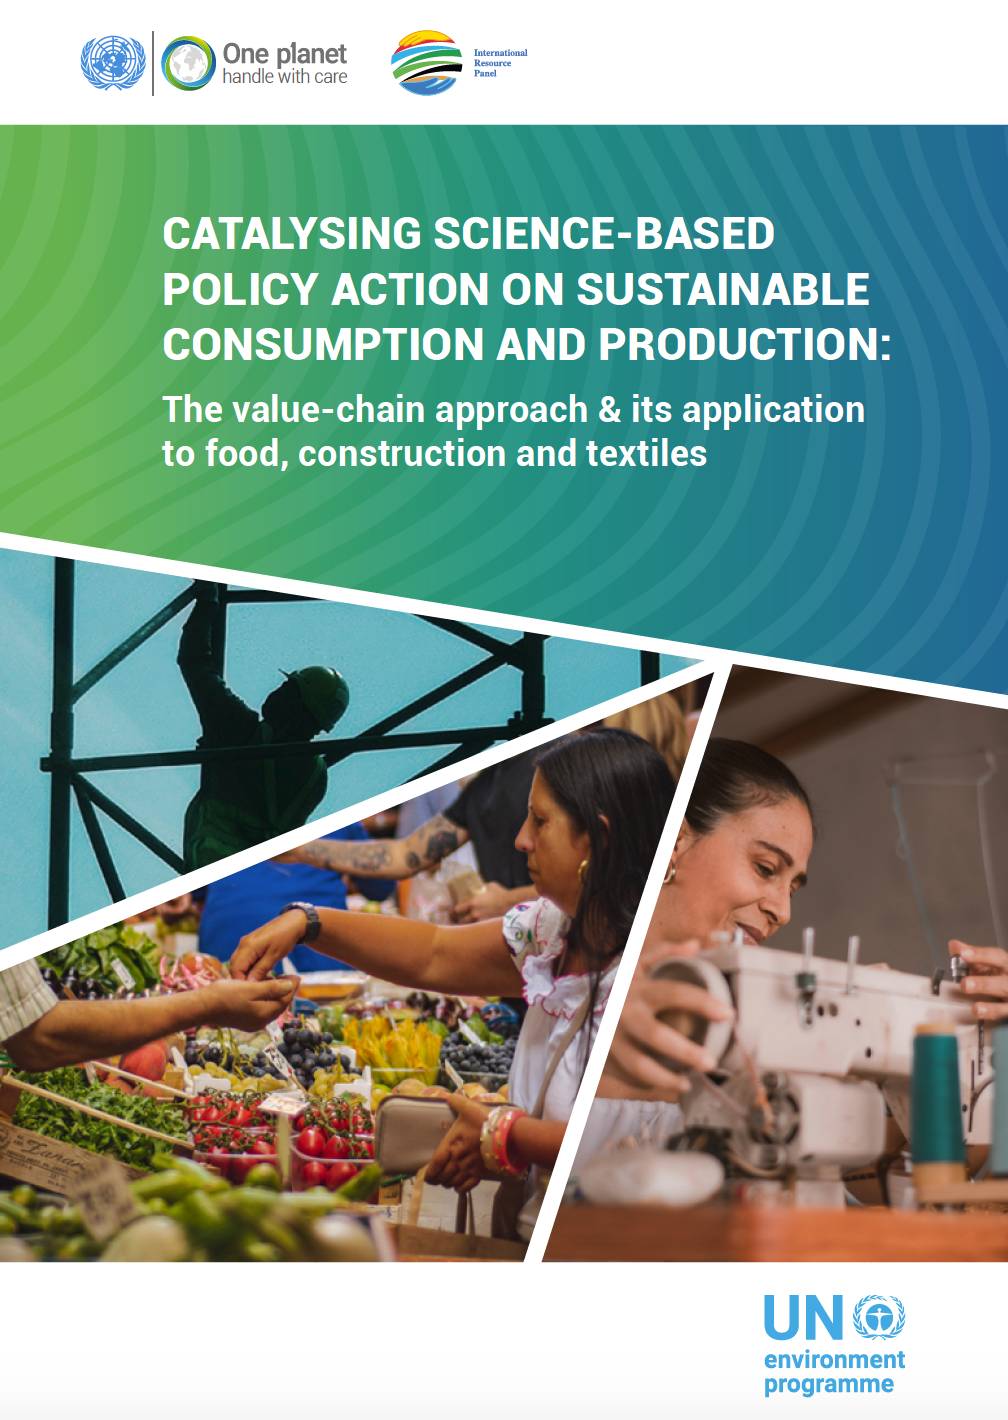 Catalysing Science-based Policy Action on SCP